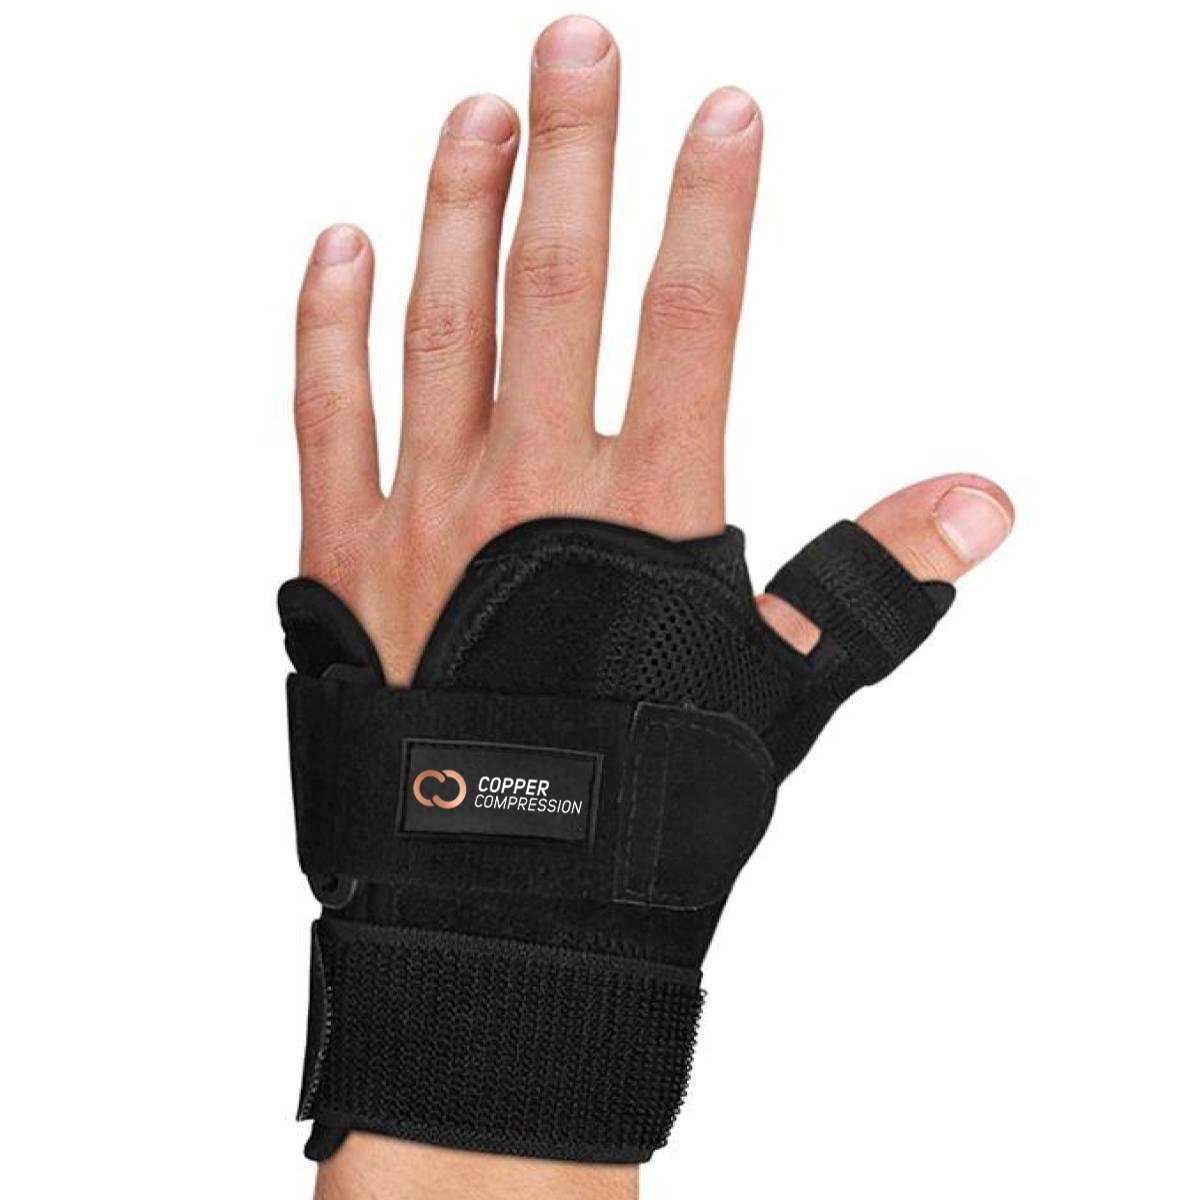 Copper Compression Recovery Thumb Brace